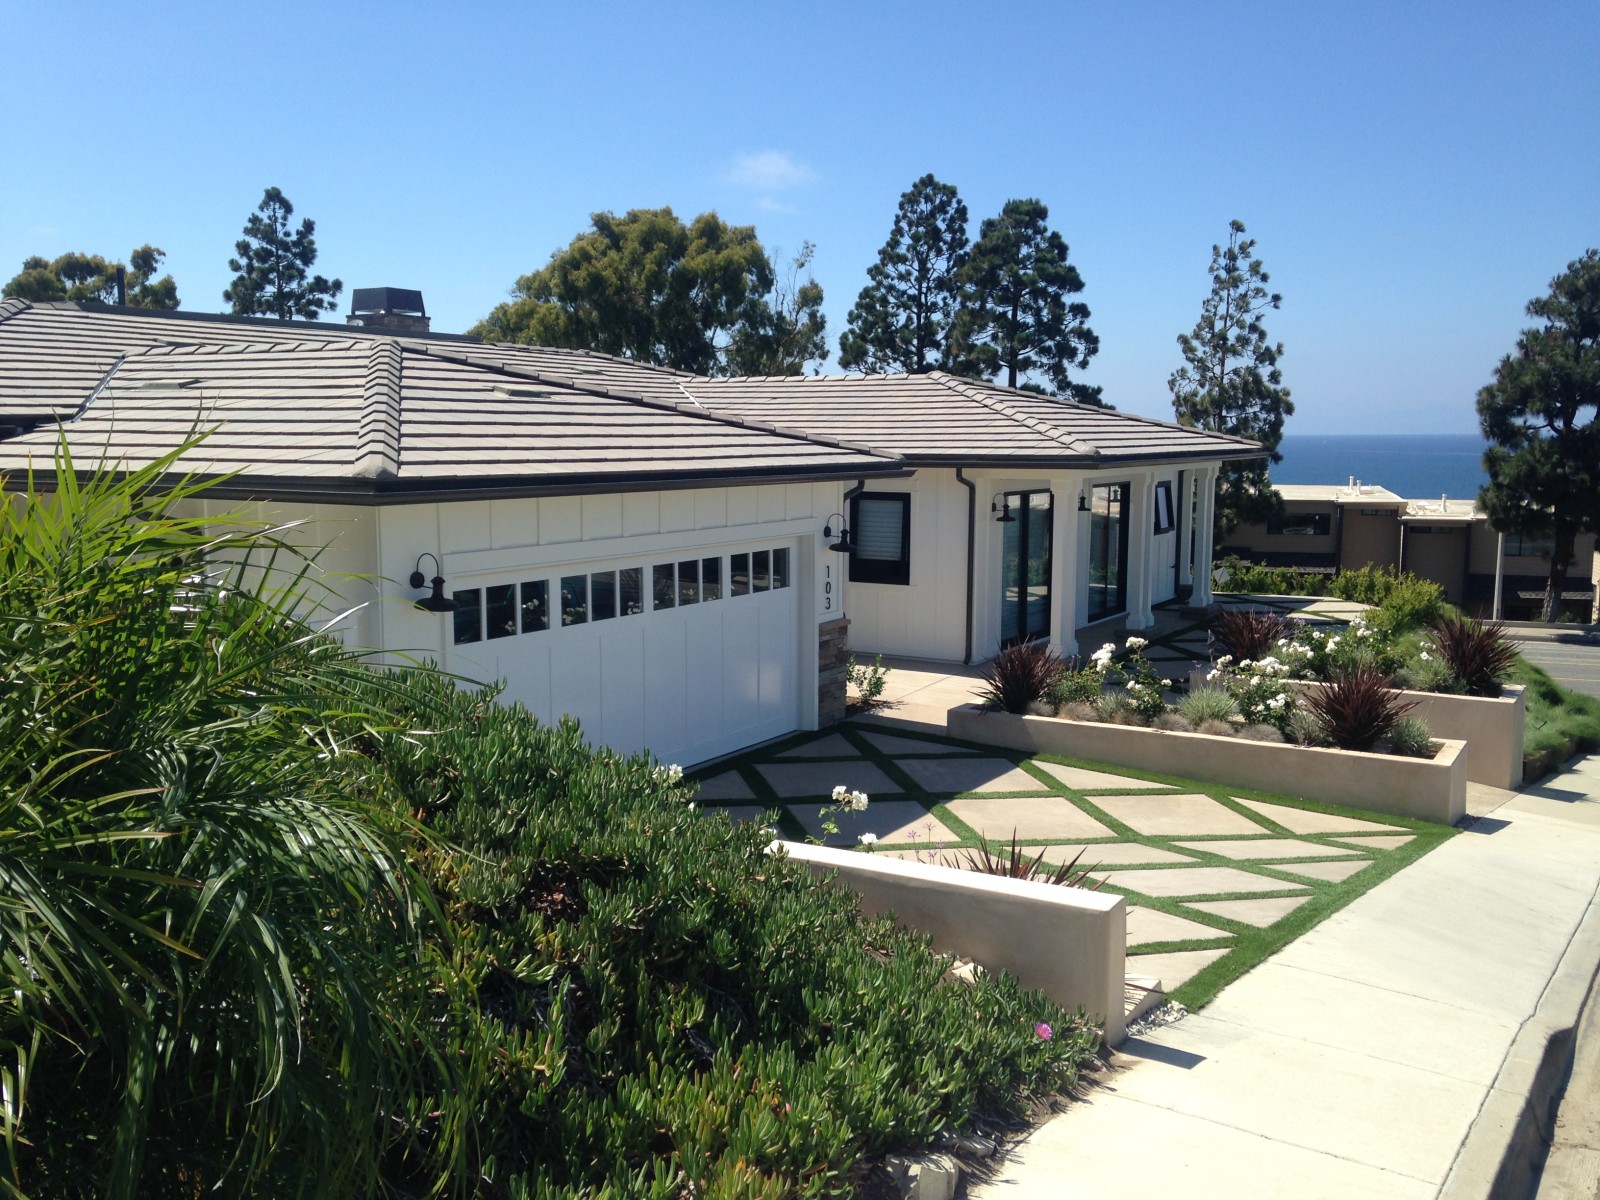 Hollywood Riviera - Redondo Beach Real Estate and Homes for Sale